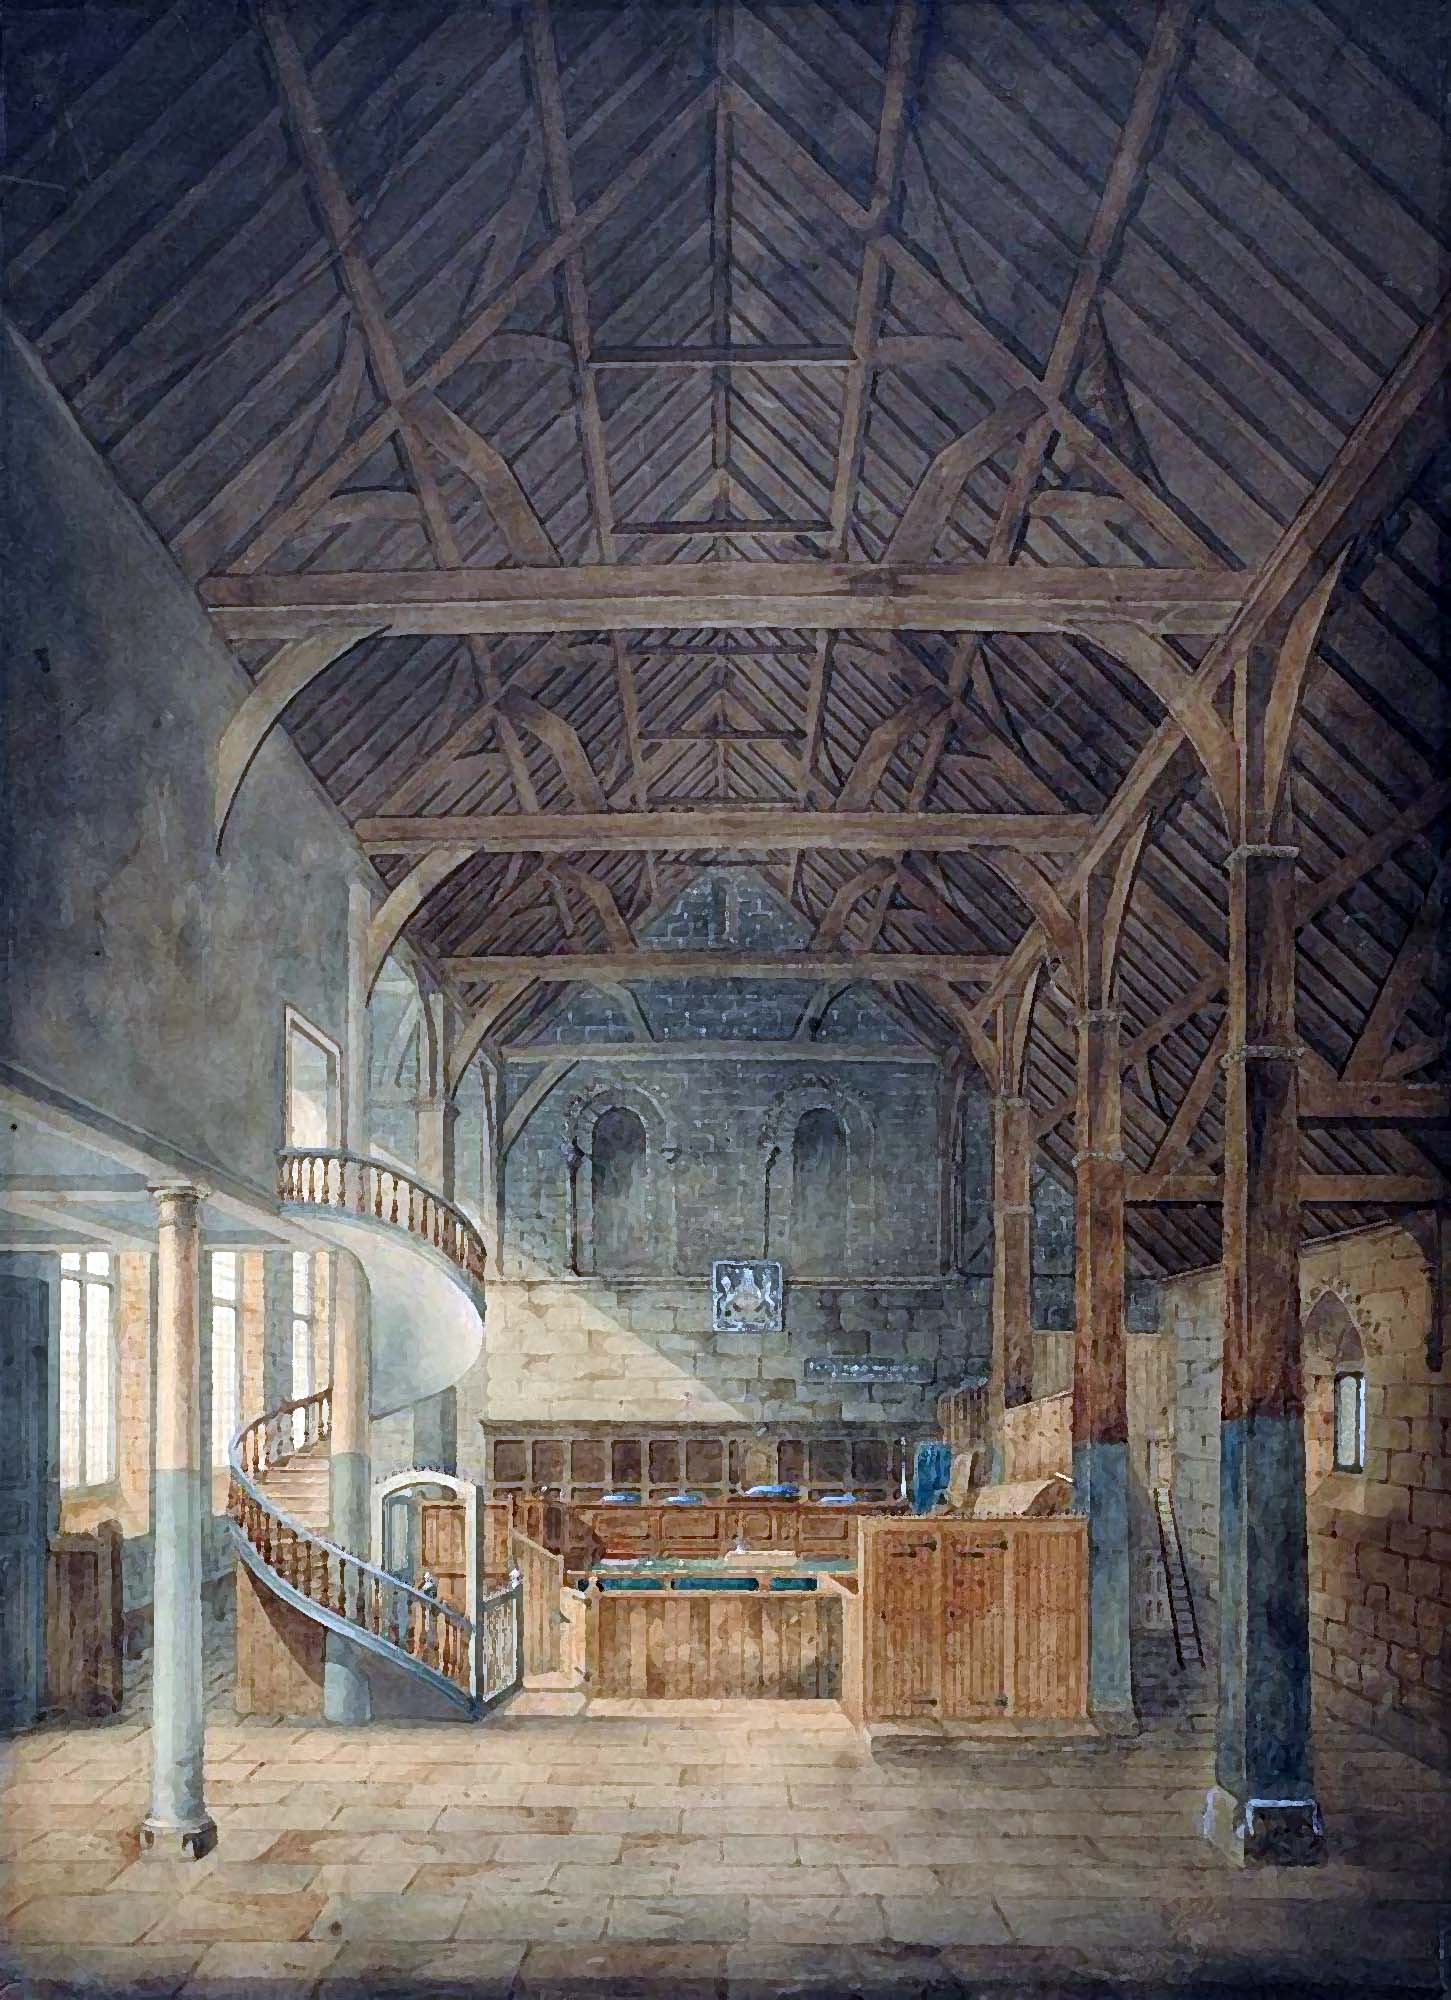 Henry Goddard’s painting of the interior of the Great Hall in 1821, before it was partitioned into separate court rooms - The Goddard Family